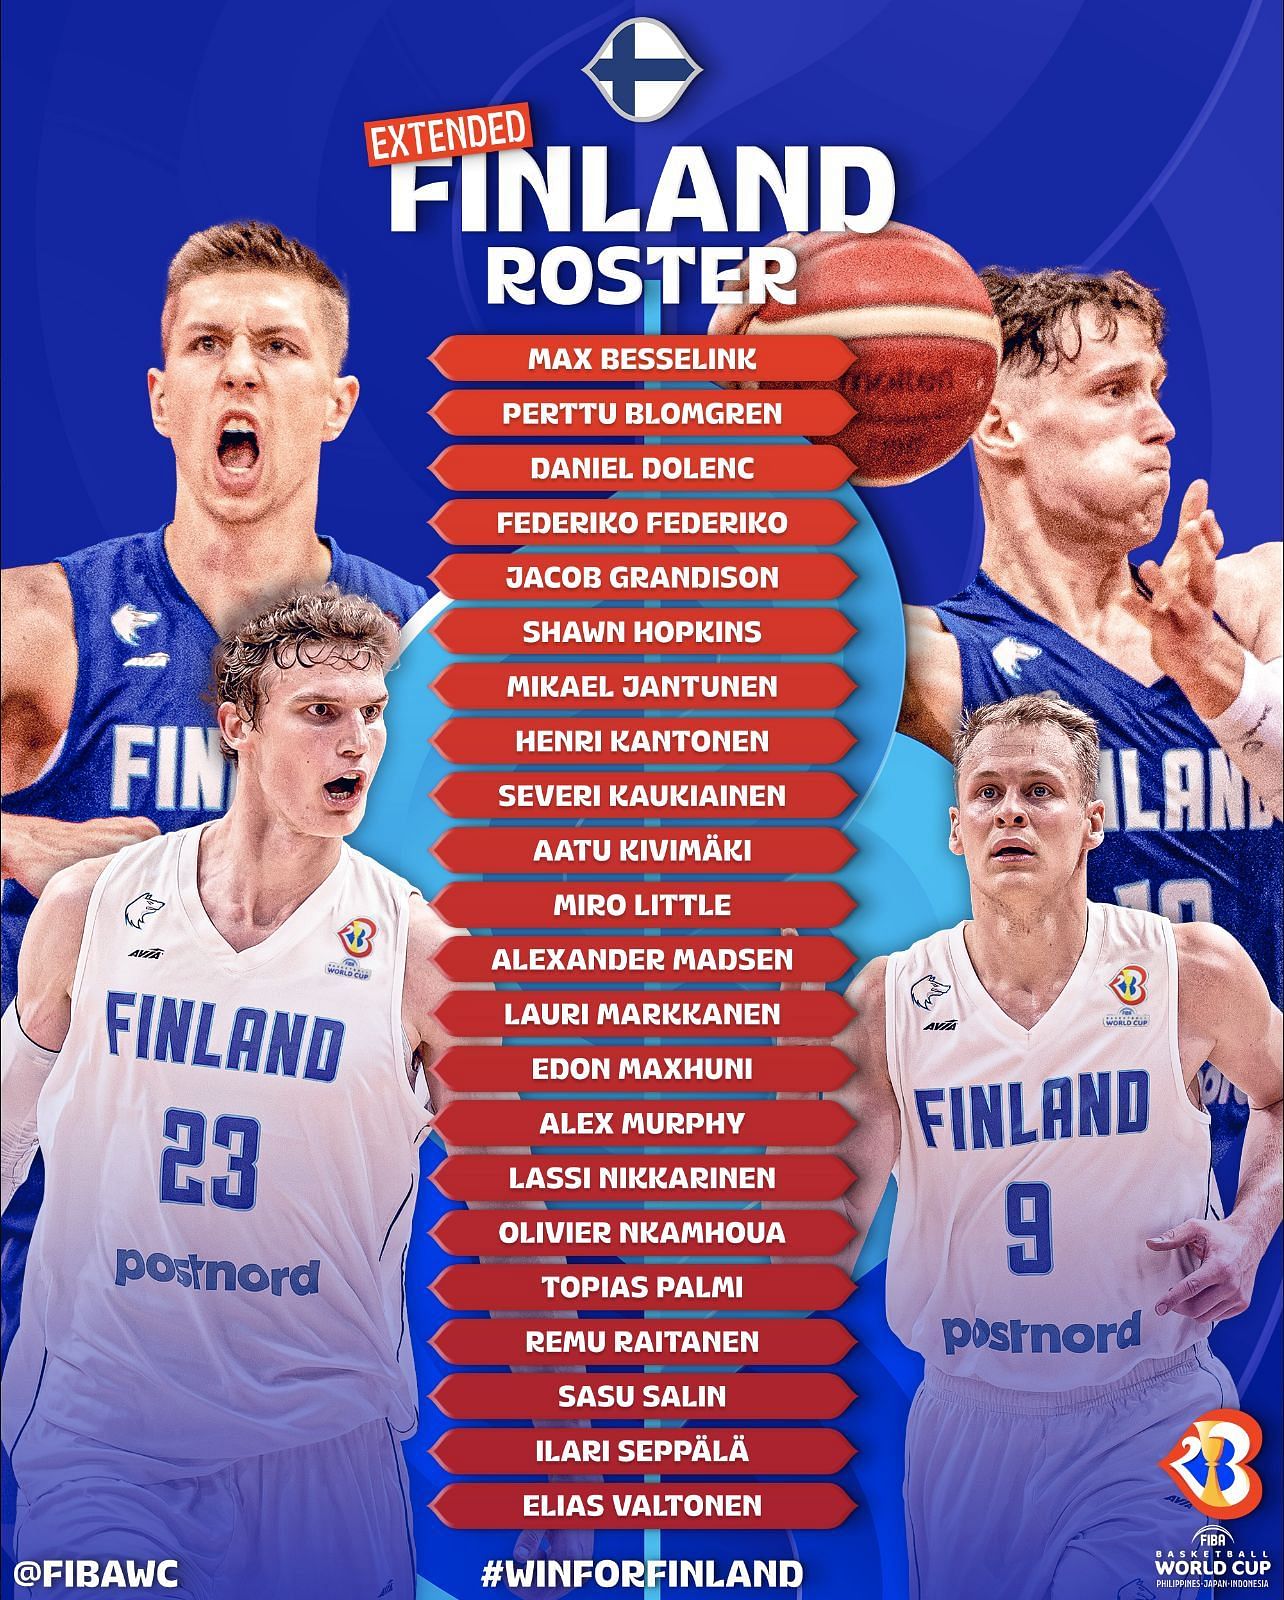 2023 FIBA World Cup - Finland Roster